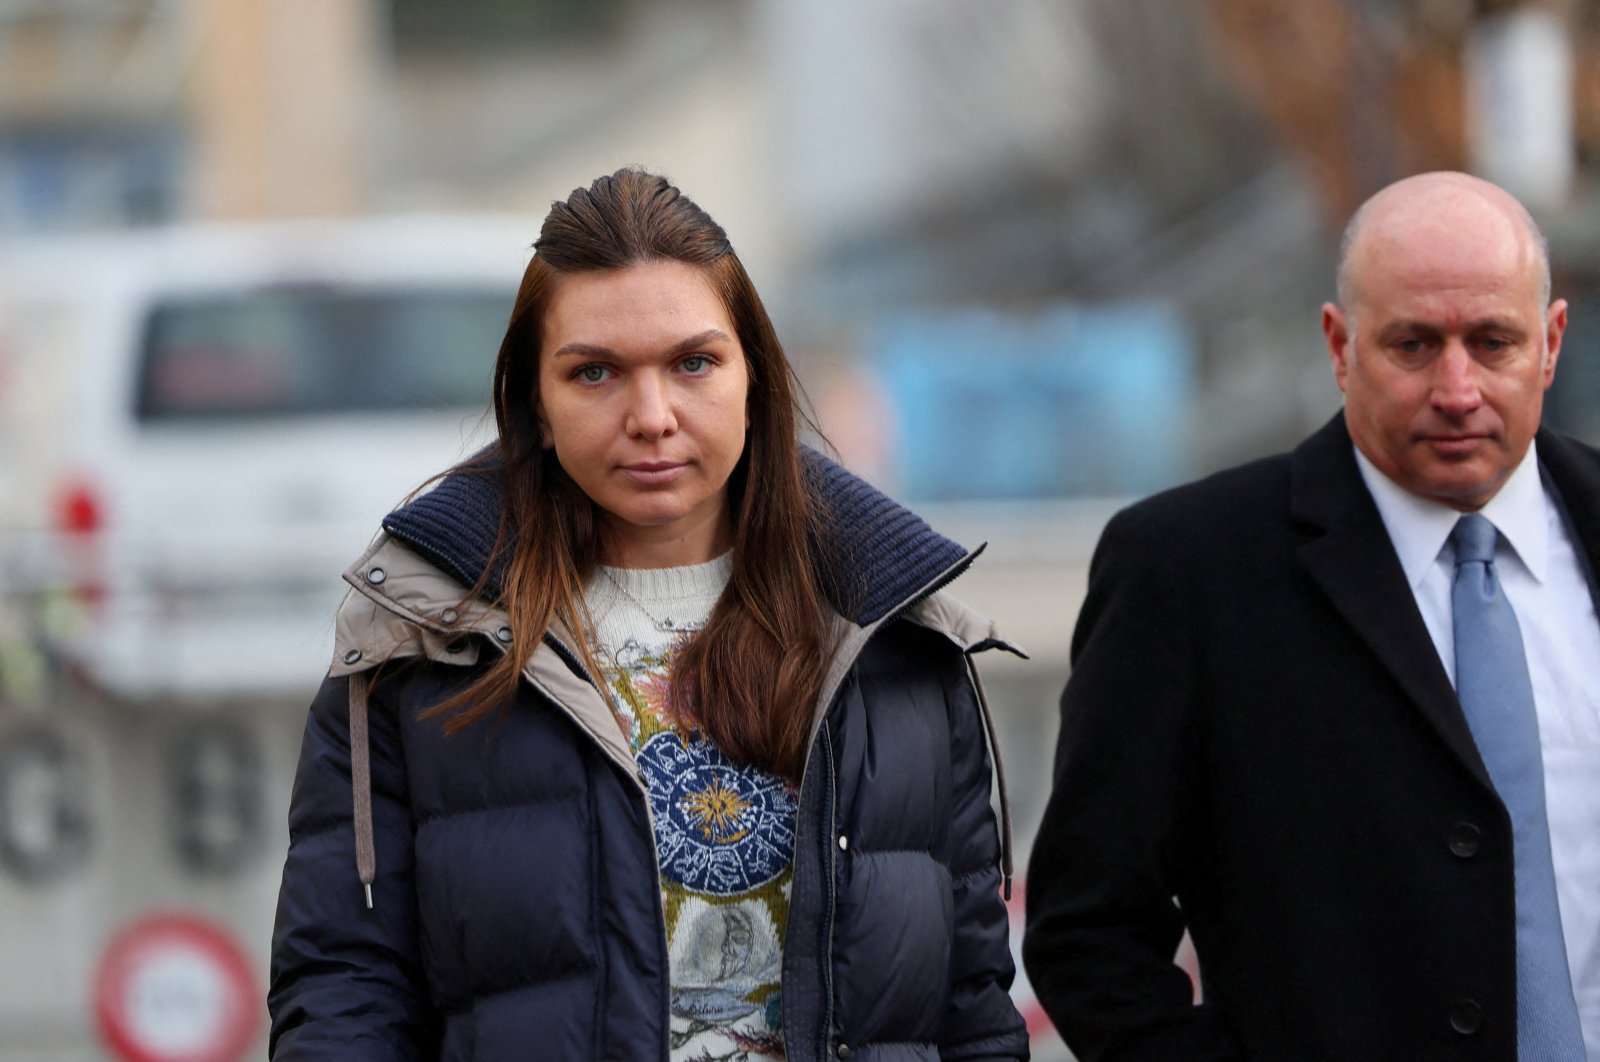 Halep appeals career-threatening doping suspension in top court